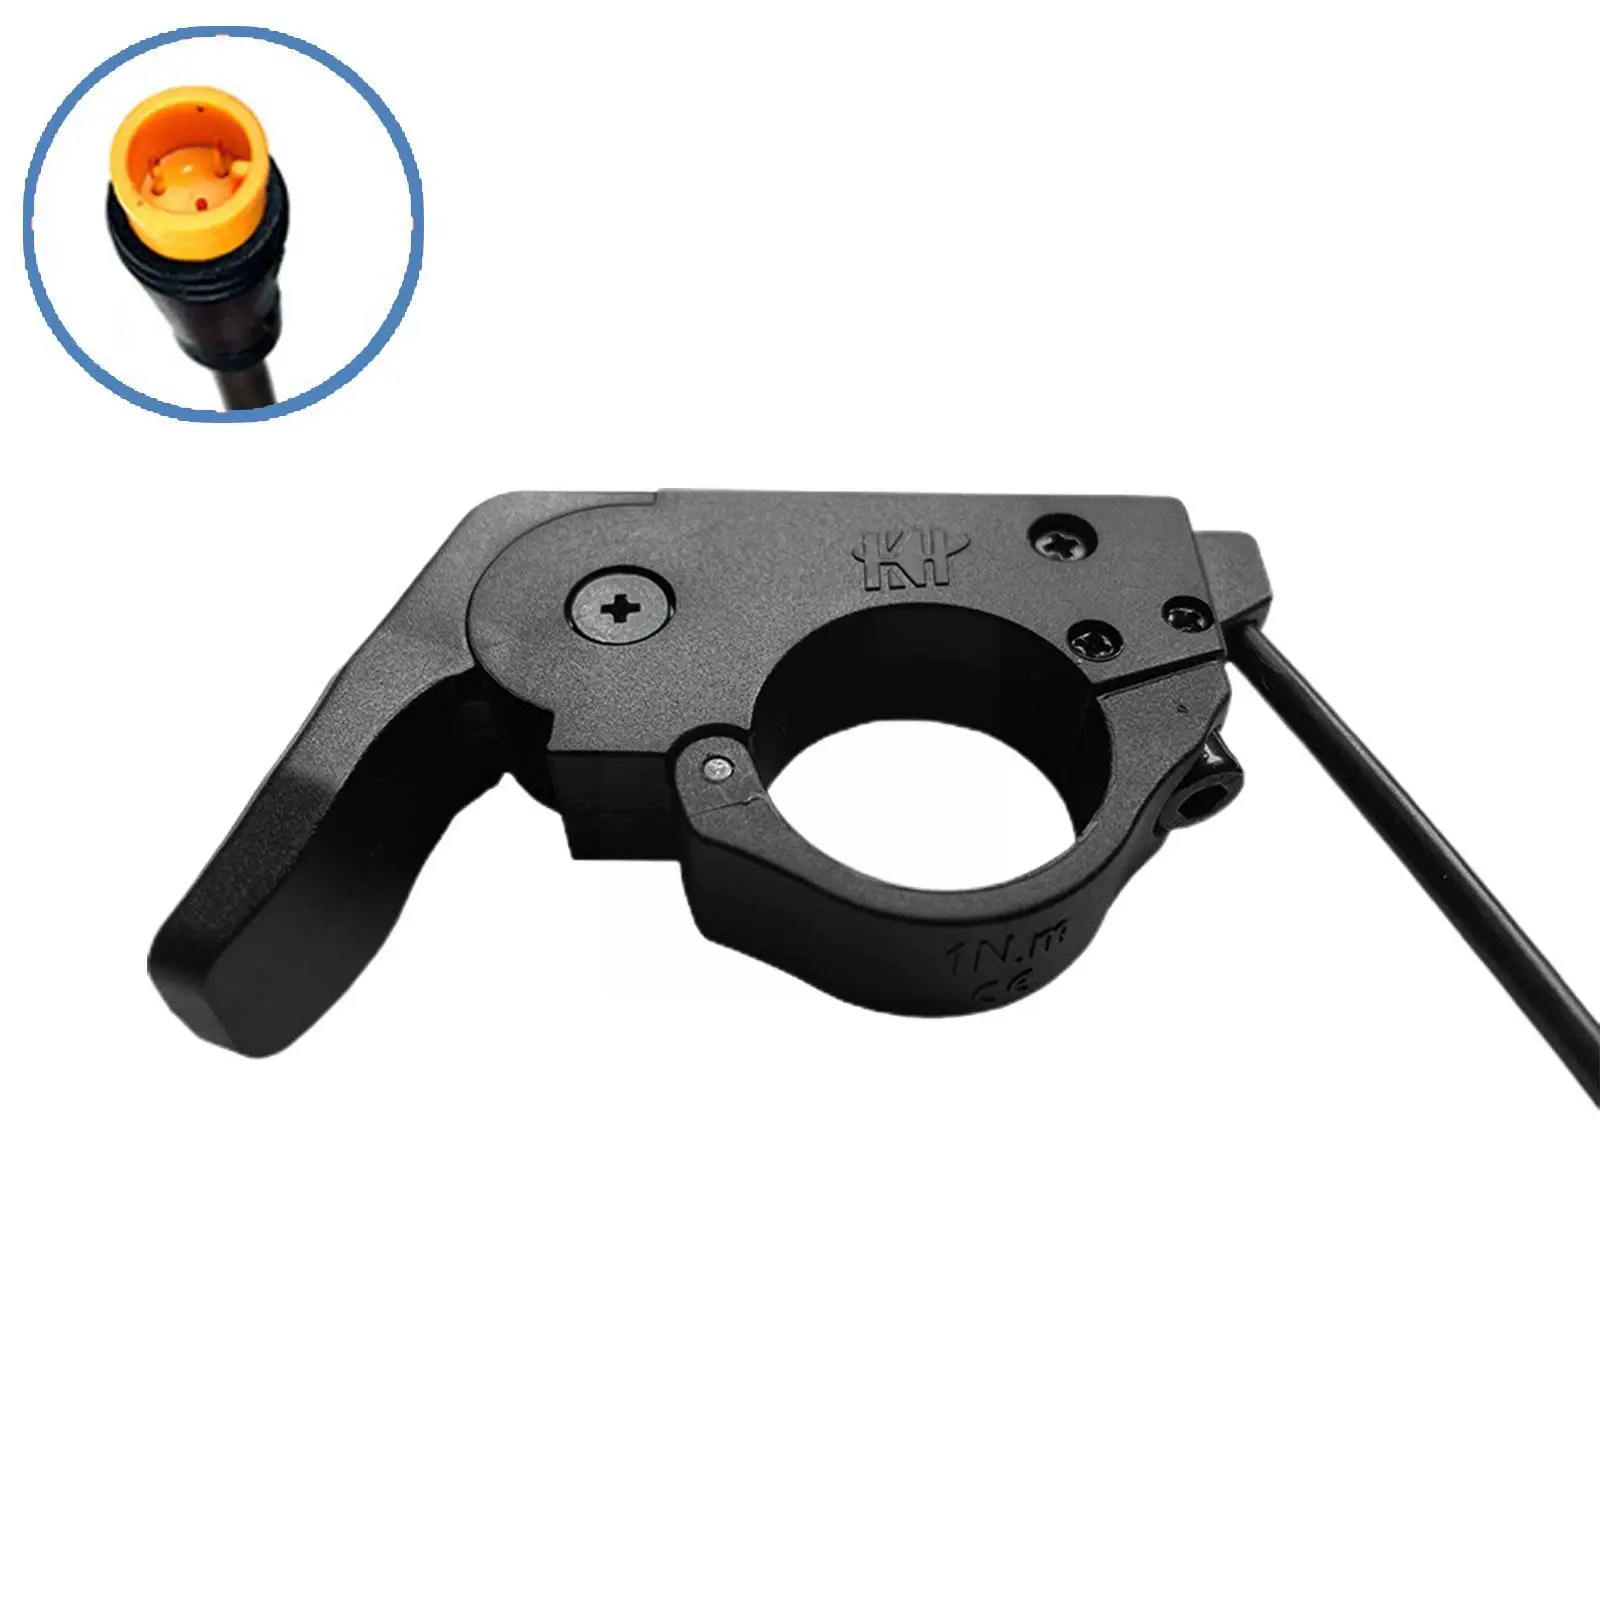 

Bicycle Thumb Throttle Finger Trigger TT-009 3 Pin Waterproof SM Plug Connector Suit For Electric Bike Ebike Scooter Black E9H8